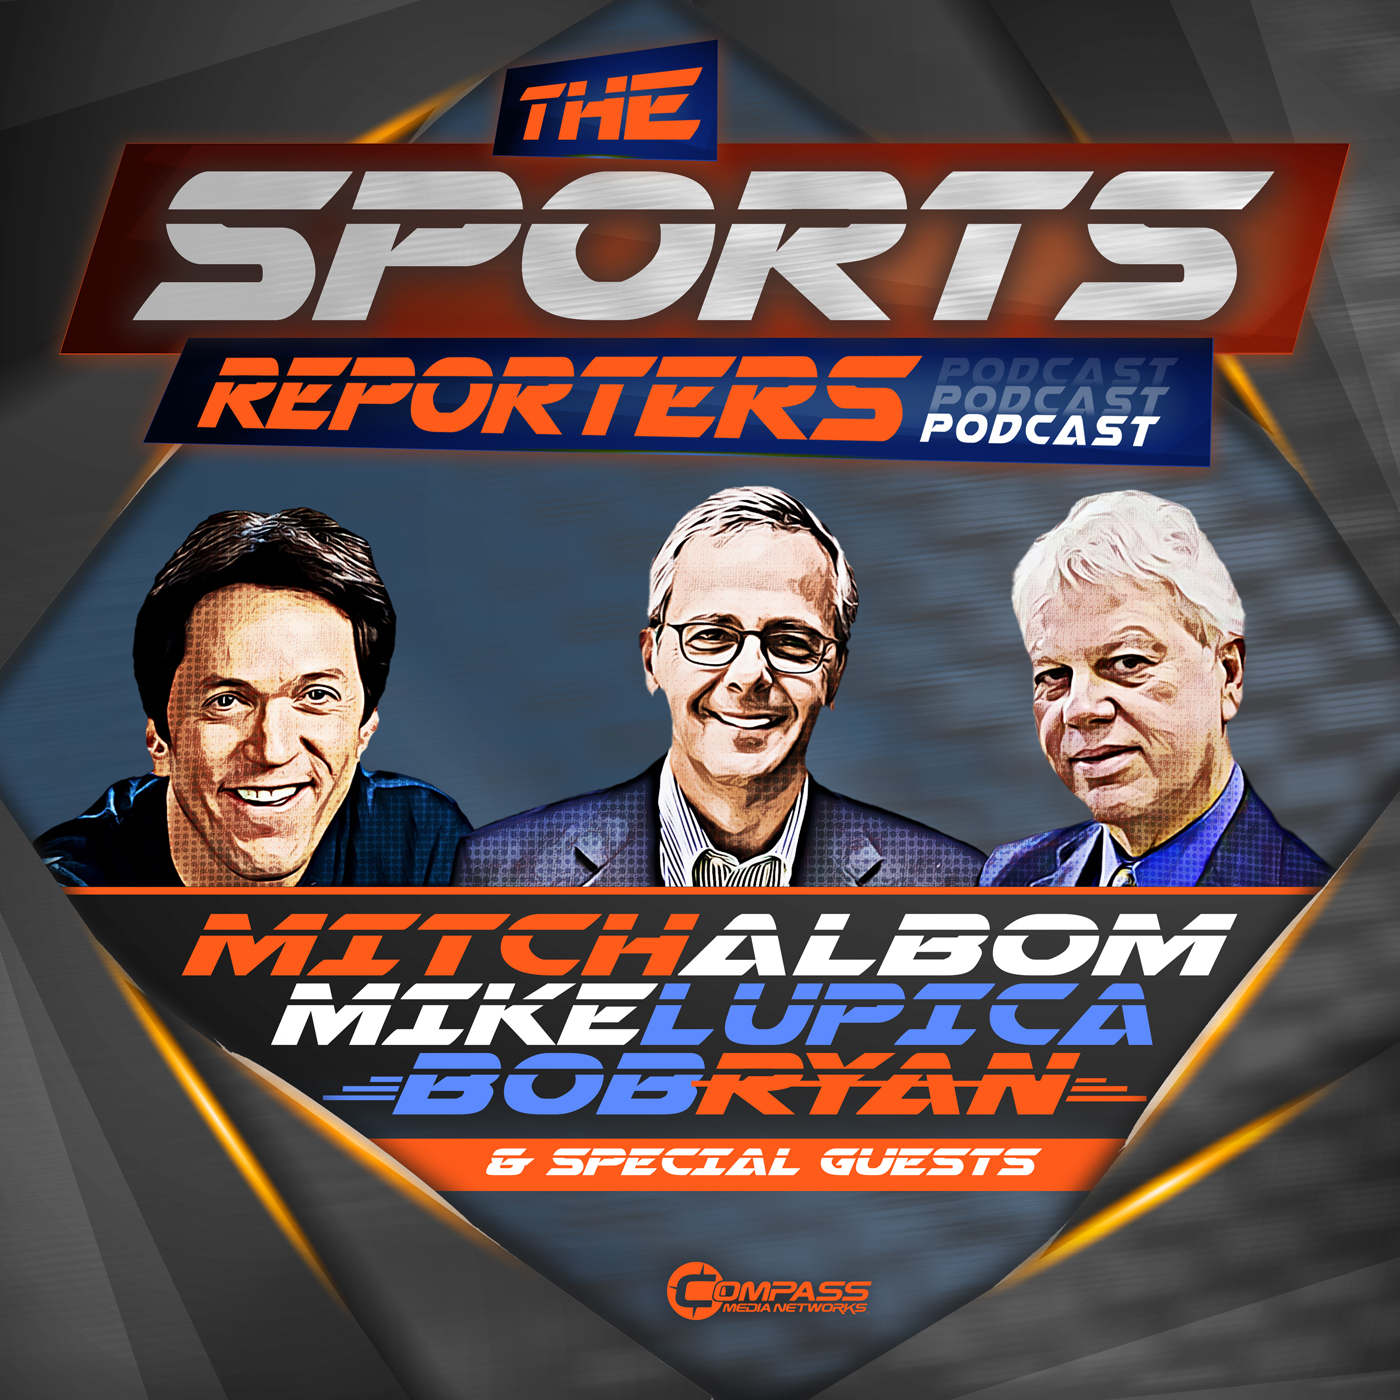 The Sports Reporters - Episode 204 - Discussing the Jay-Z, NFL partnership